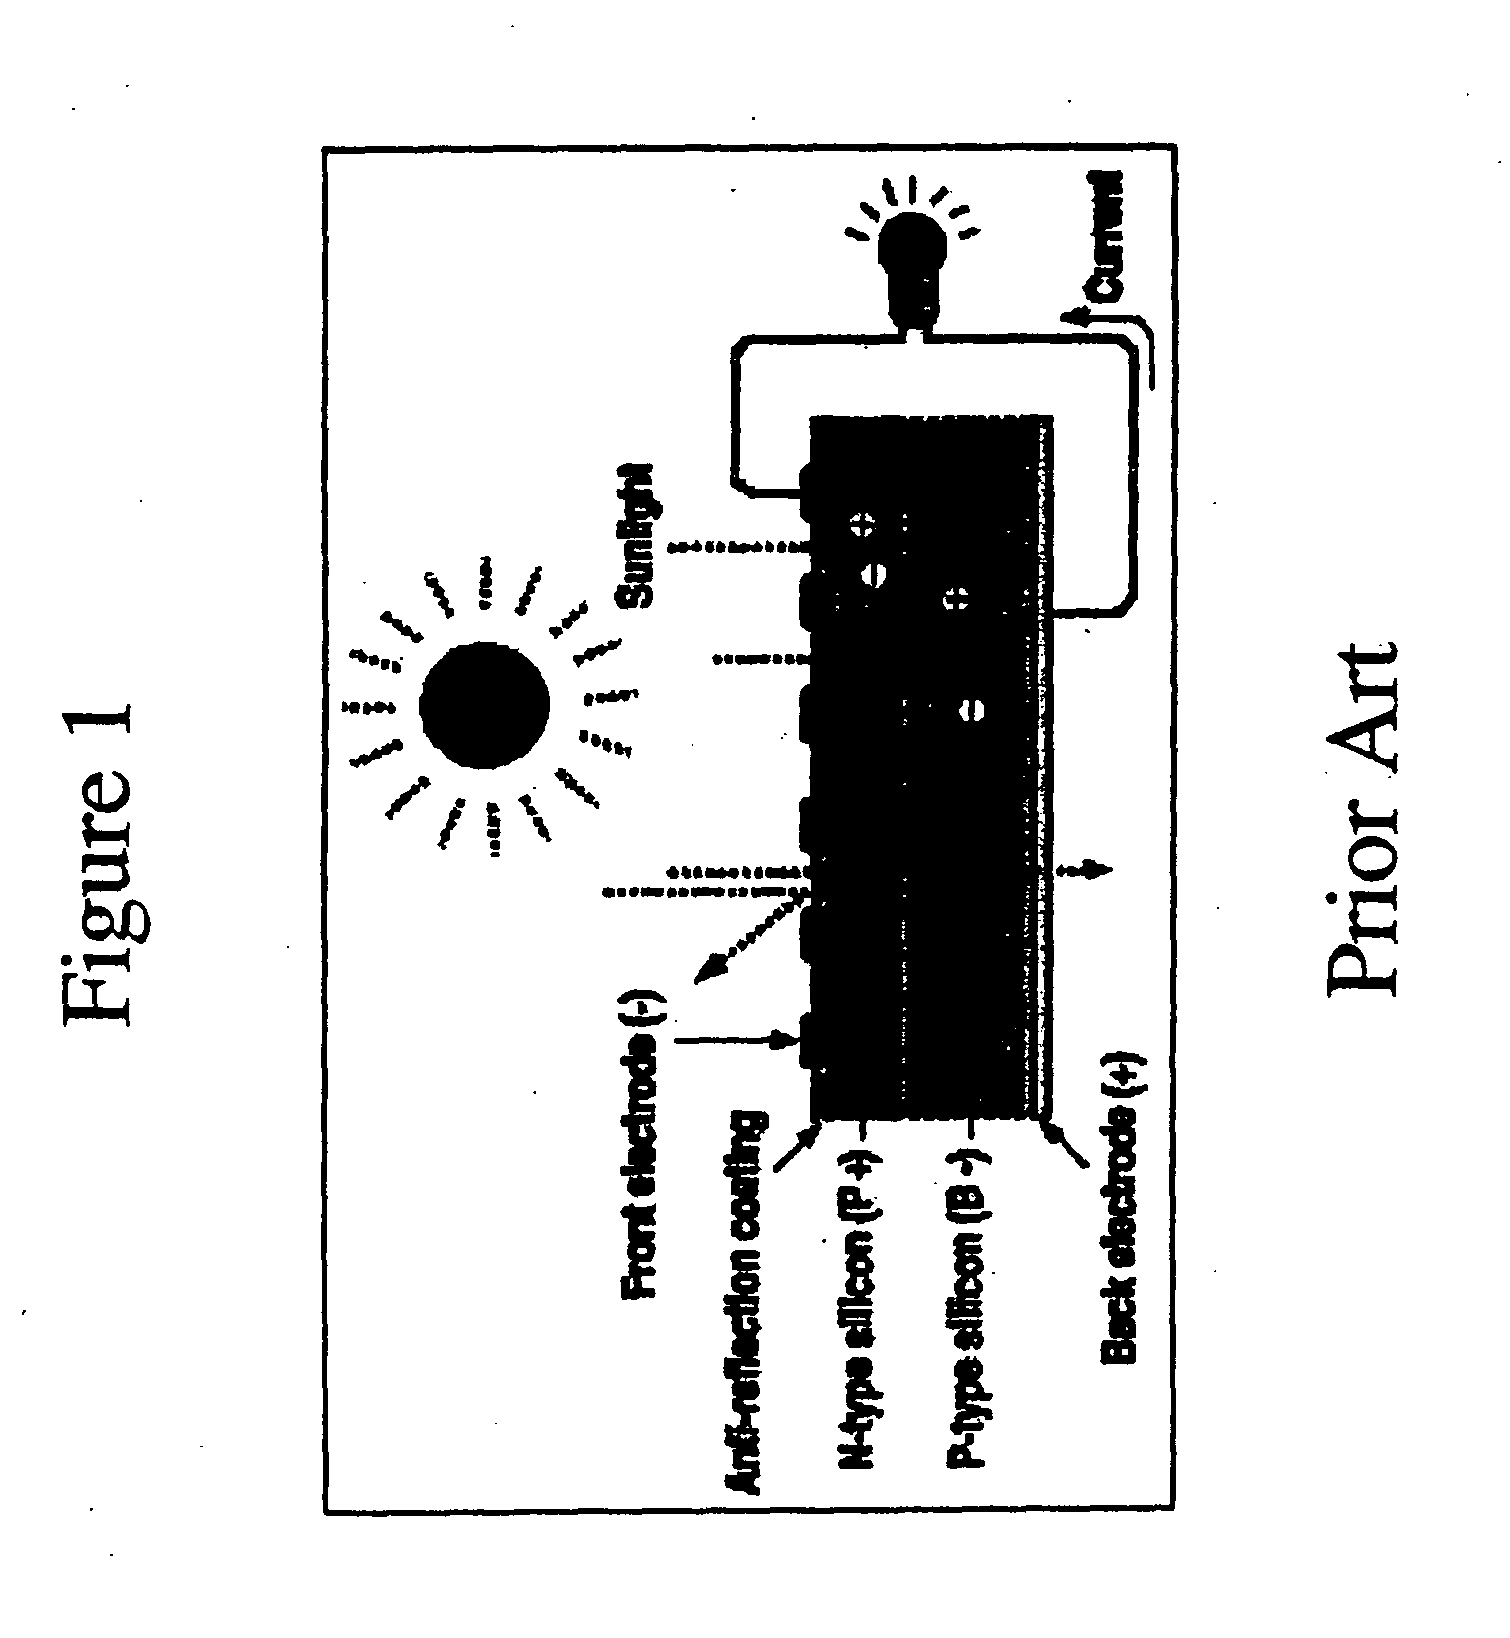 Apparatus and method for photovoltaic energy production based on internal charge emission in a solid-state heterostructure